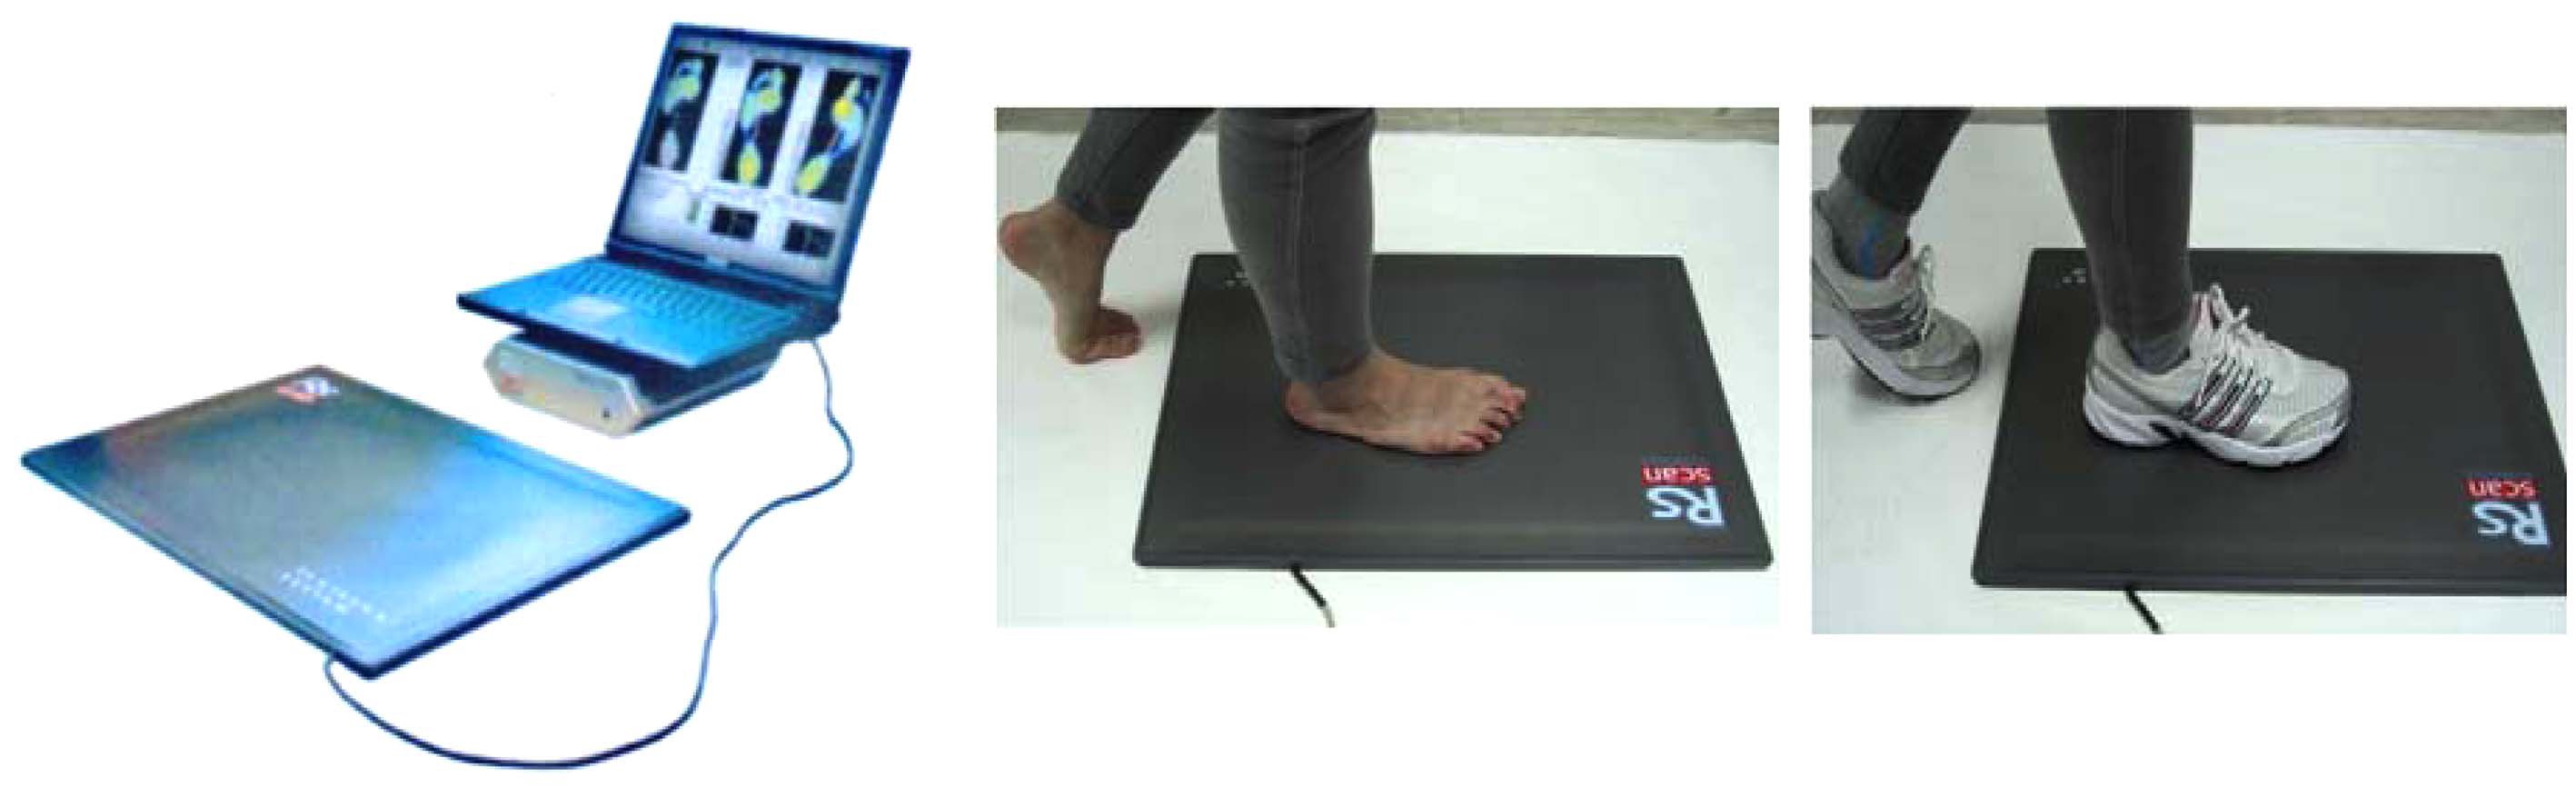 RS-scan system and gait measurement.